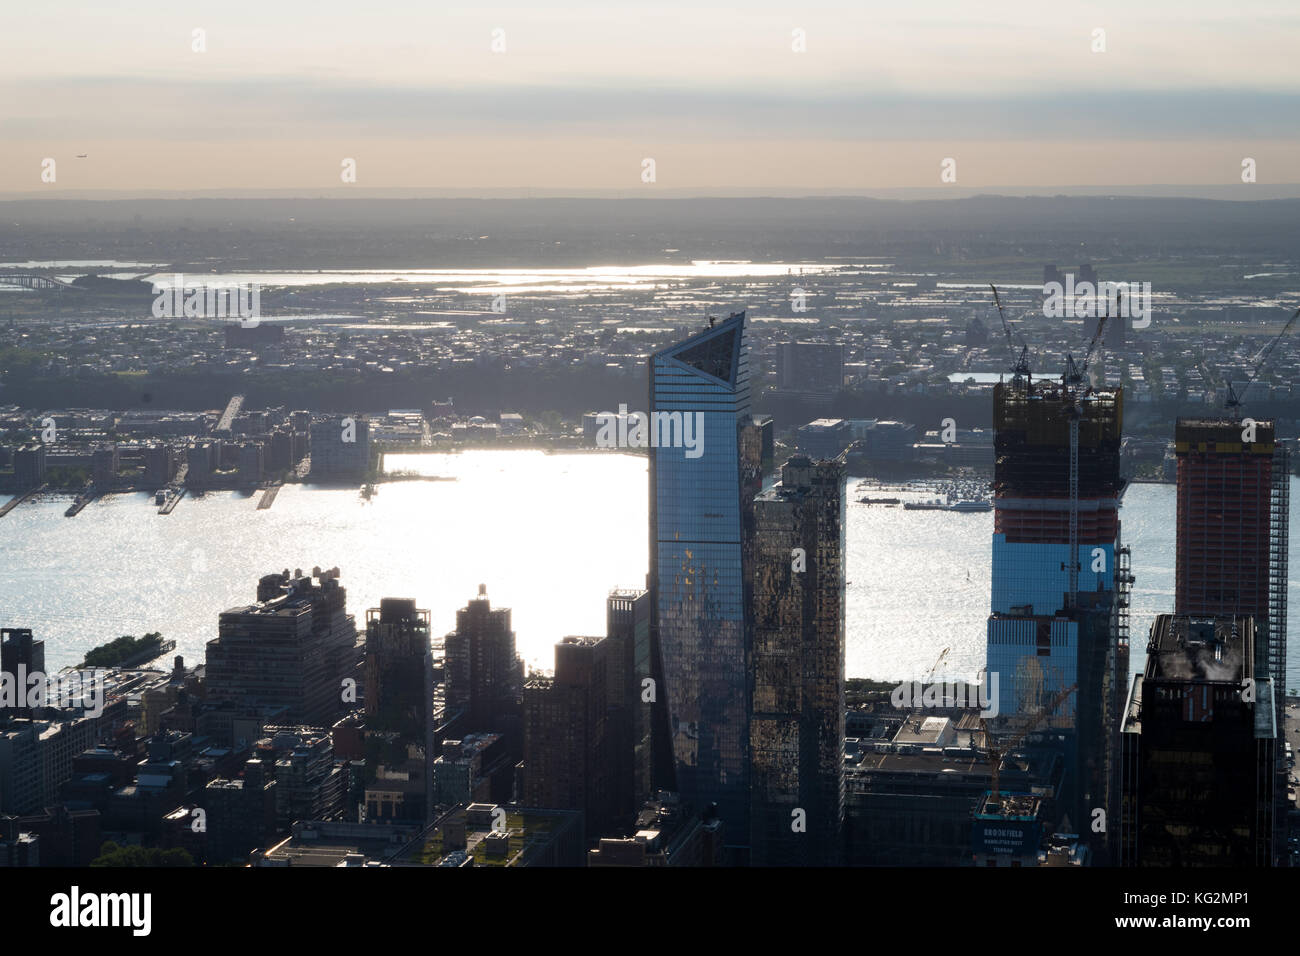 Panoramic photo of Manhattan skyline, skyscrappers, buildings, river in sunny day. Stock Photo